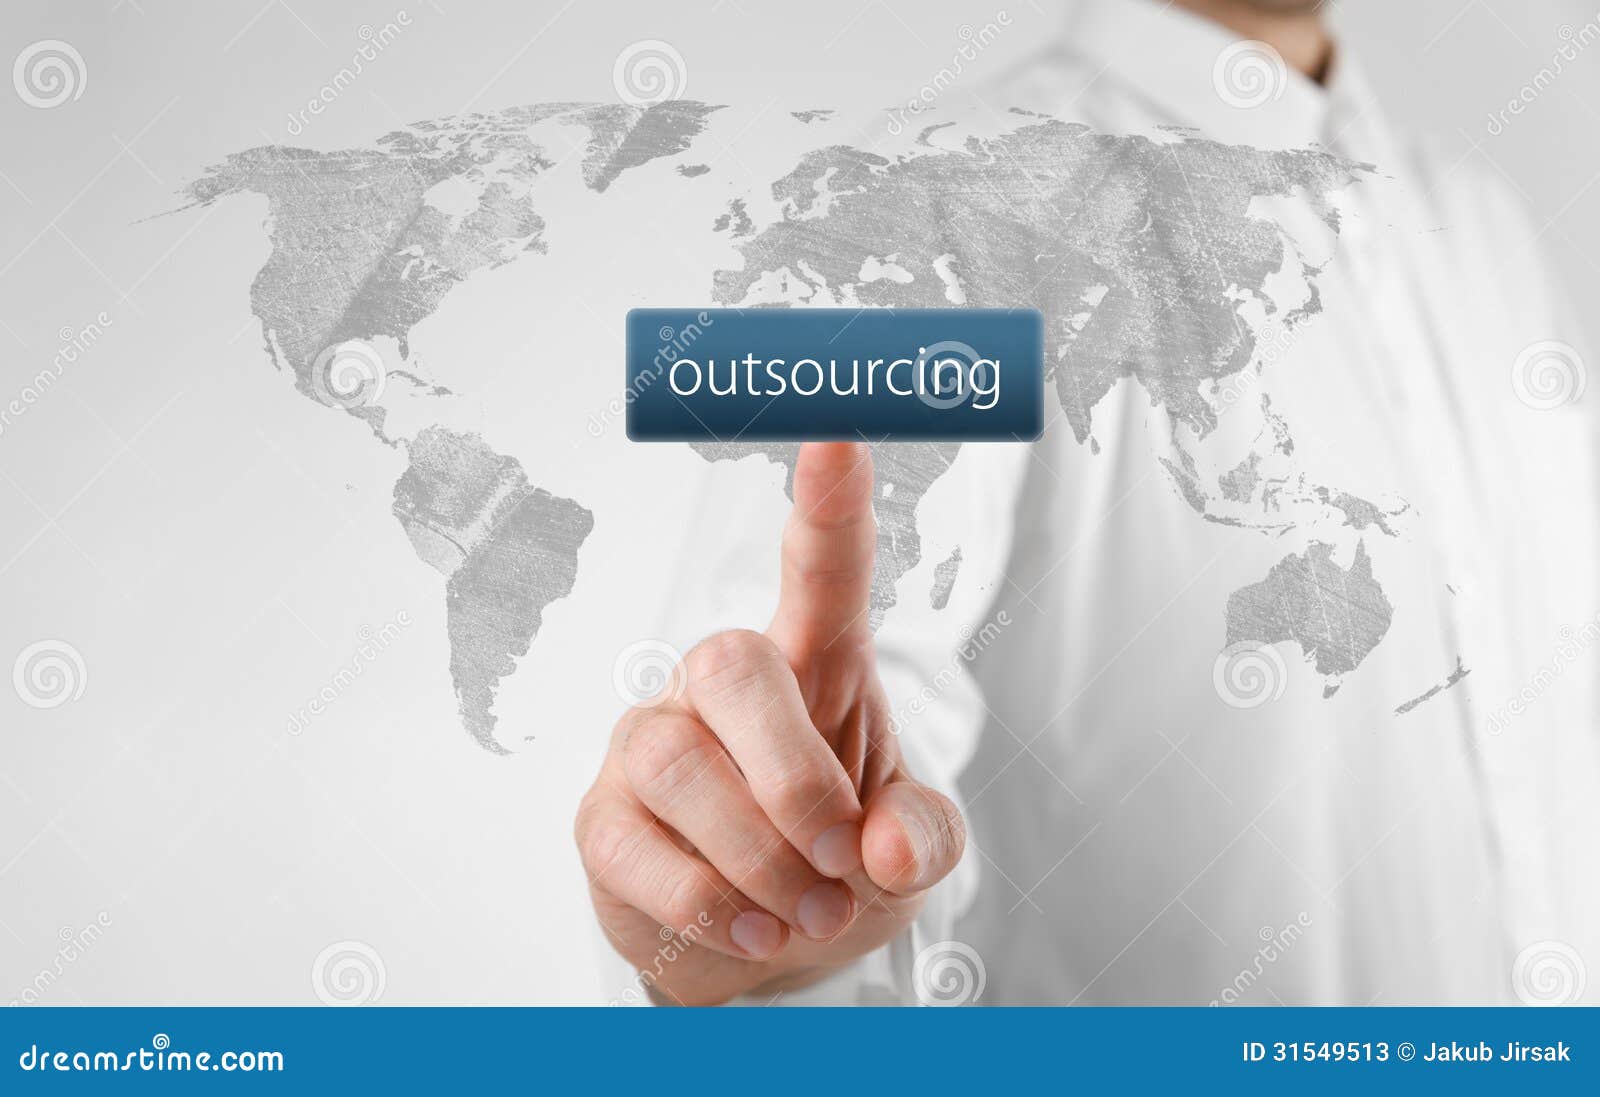 Global outsourcing